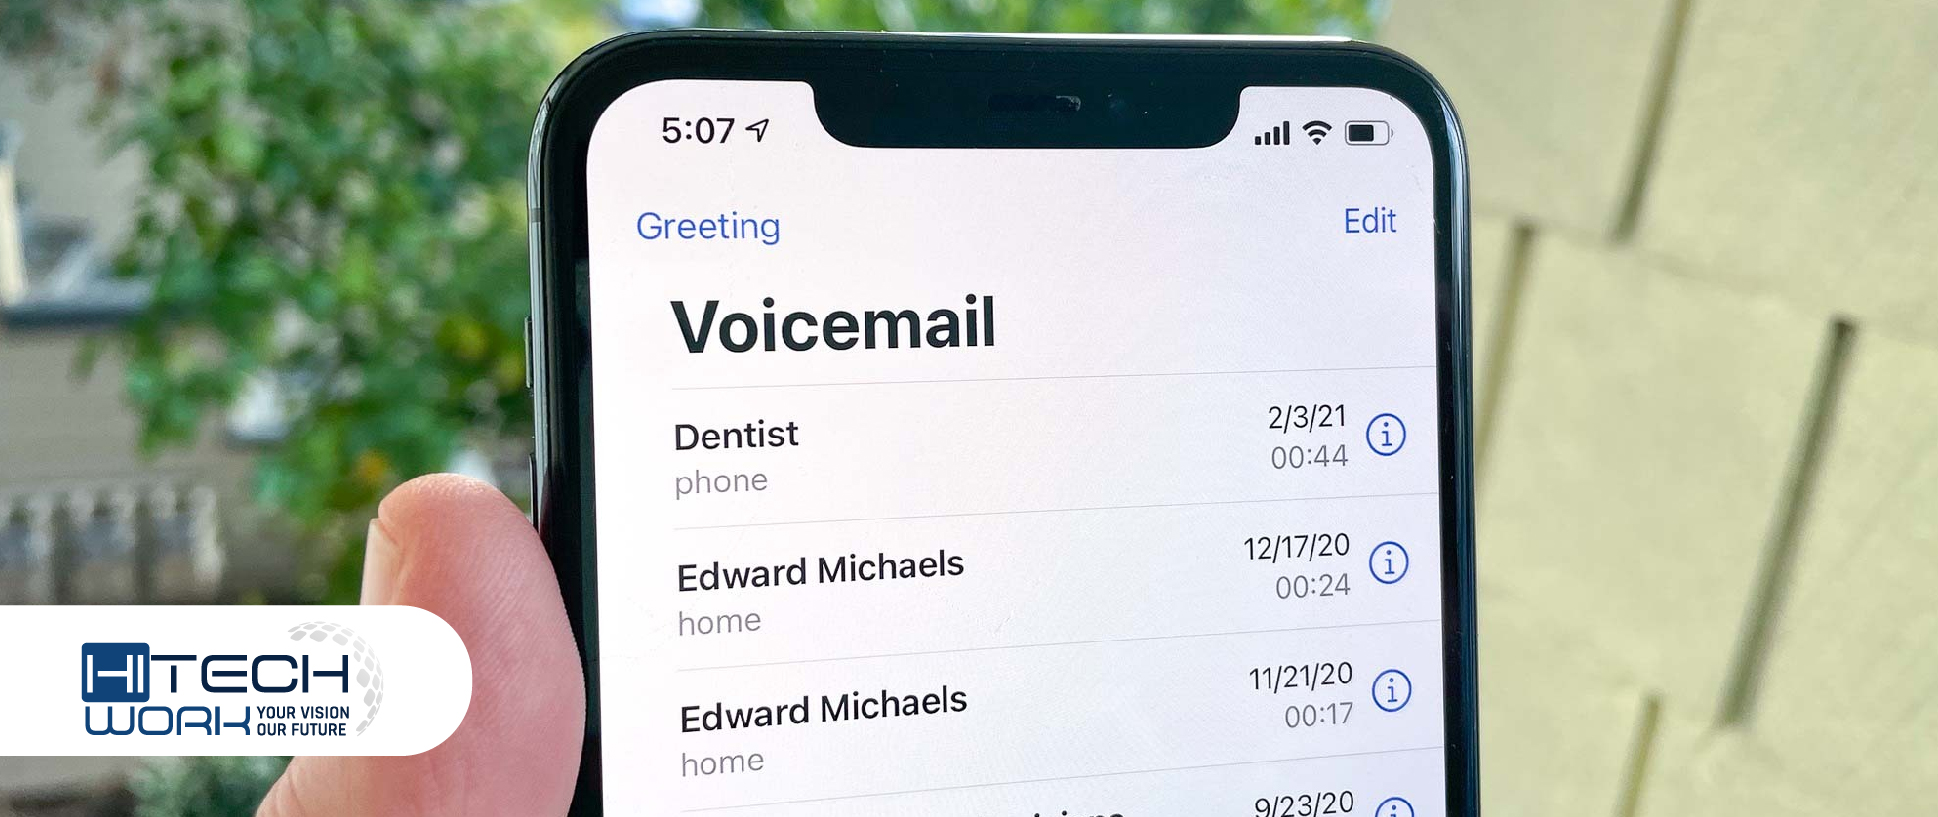 How to Change Voicemail on iPhone